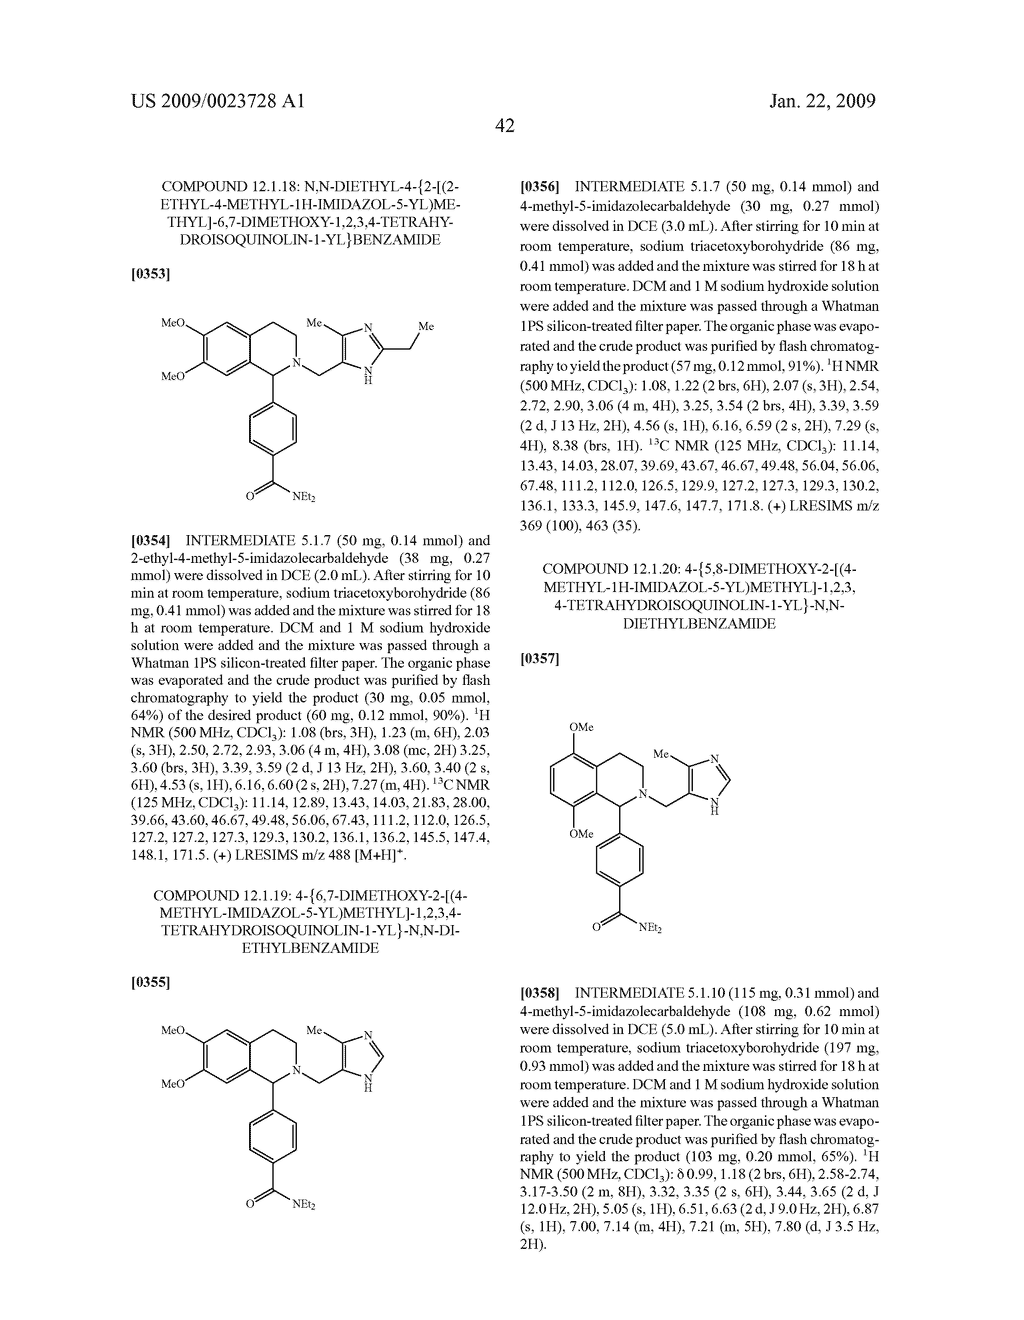 1,2,3,4-Tetrahydroisoquinoline Derivatives, Preparations Thereof and Uses Thereof - diagram, schematic, and image 43